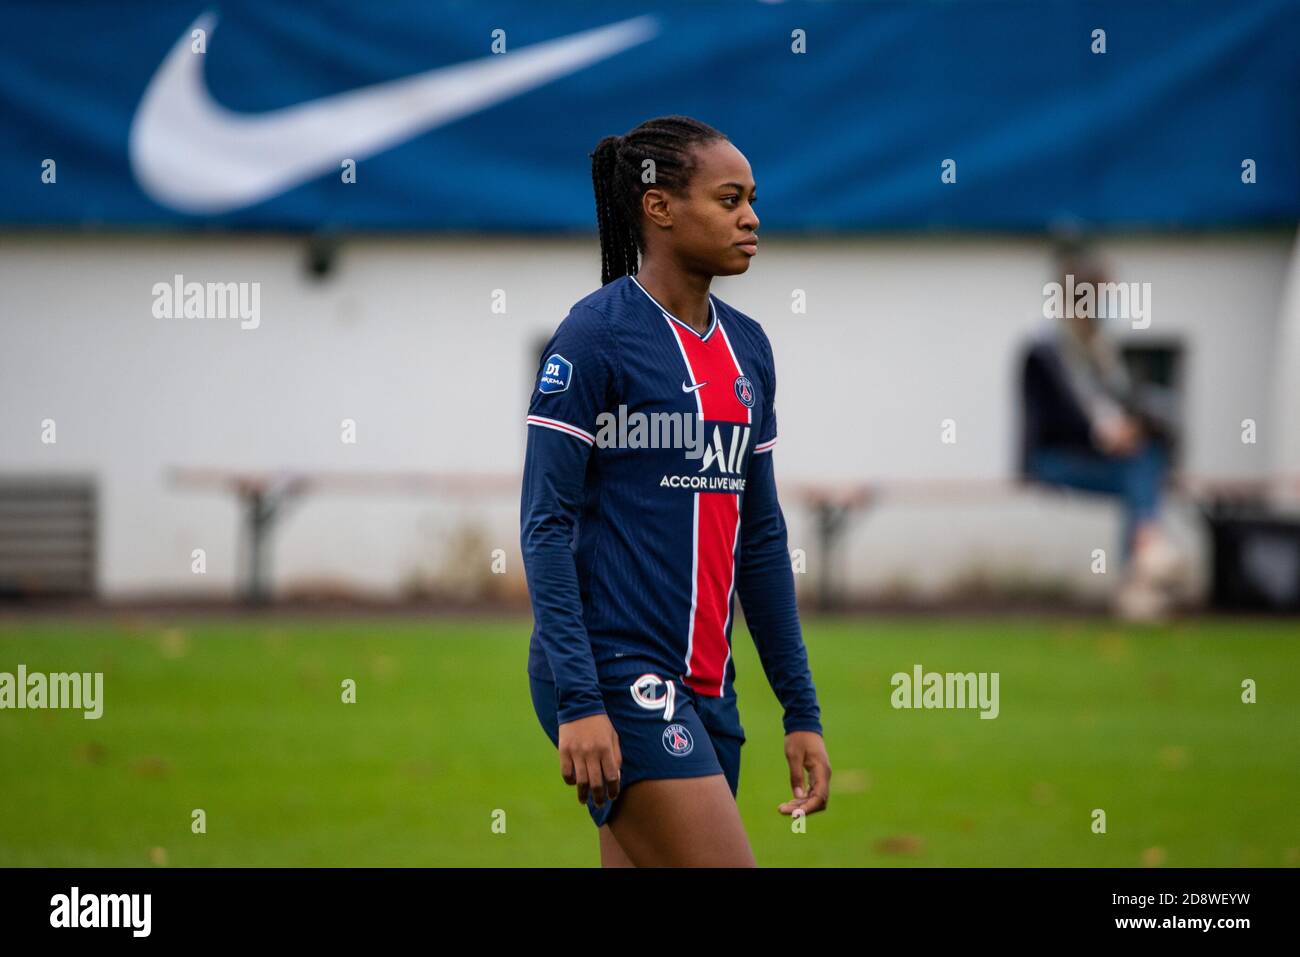 Marie Antoinette Katoto of Paris Saint Germain reacts during the Women's French championship D1 Arkema football match between Paris Saint-Germain and FC Fleury 91 on November 1, 2020 at Georges Lef.vre stadium in Saint-Germain-en-Laye, France - Photo Antoine Massinon / A2M Sport Consulting / DPPI Credit: LM/DPPI/Antoine Massinon/Alamy Live News Stock Photo